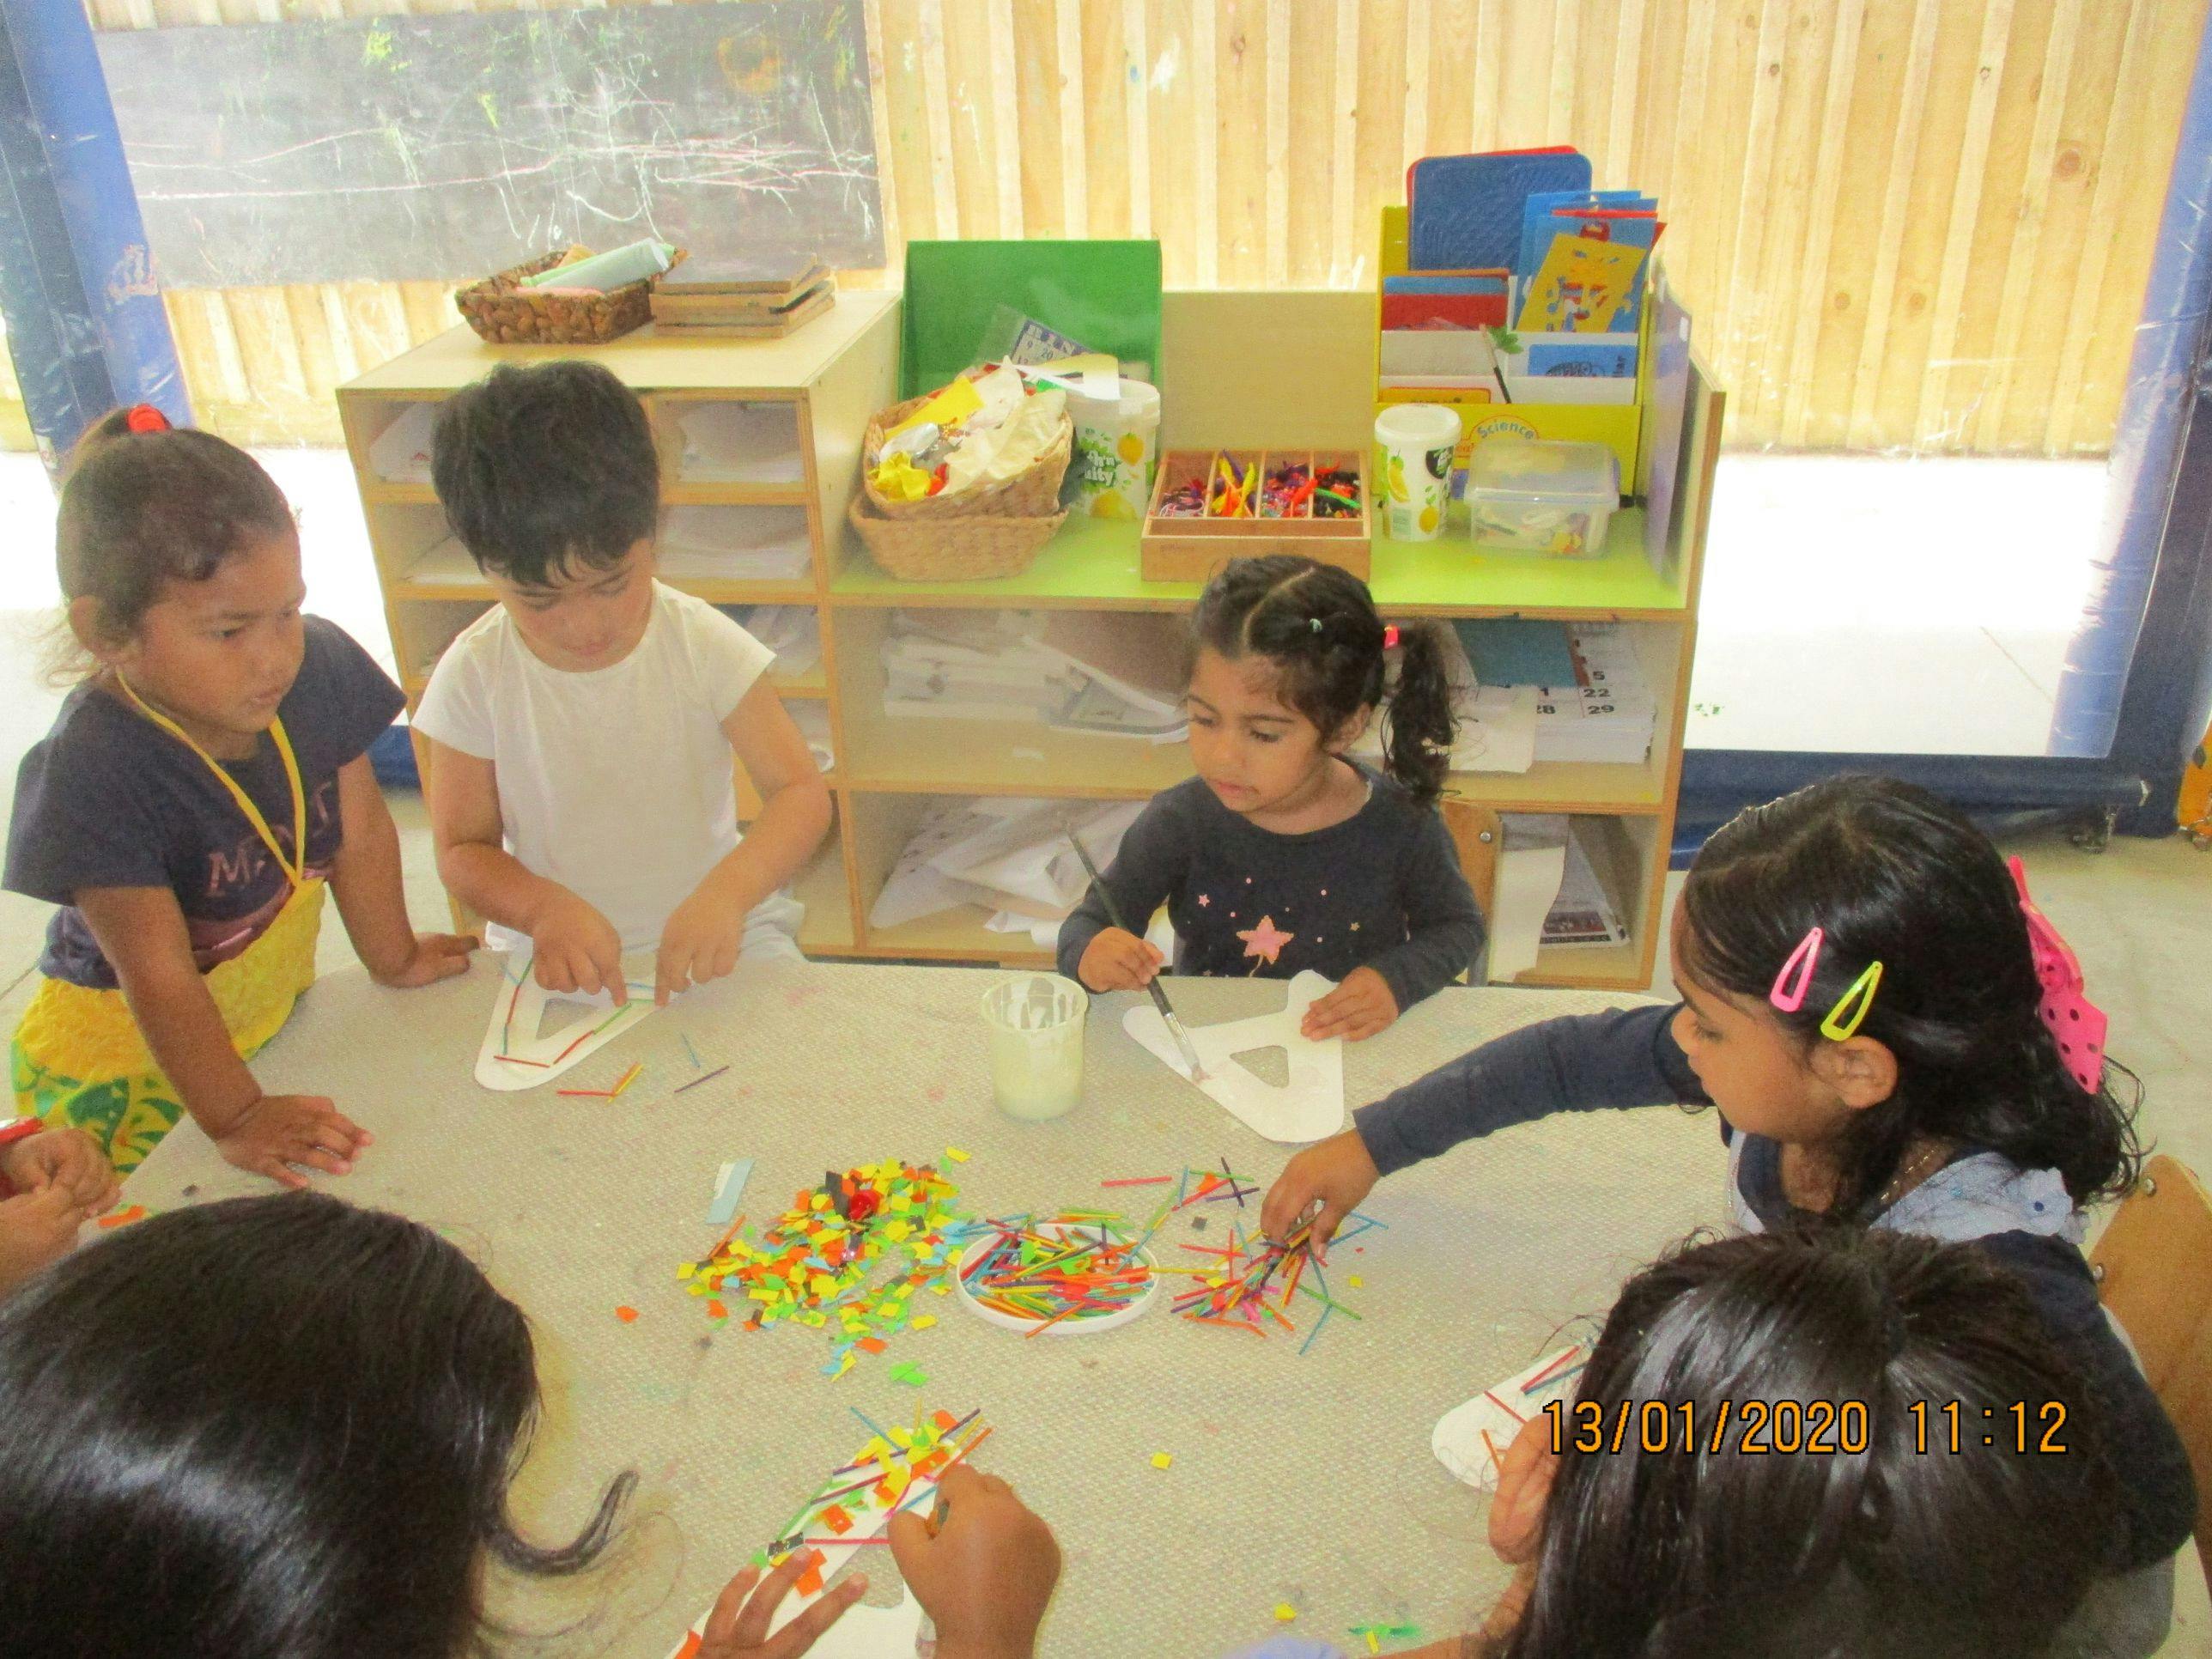 A picture of Little Hands Childcare & Early Learning Centre